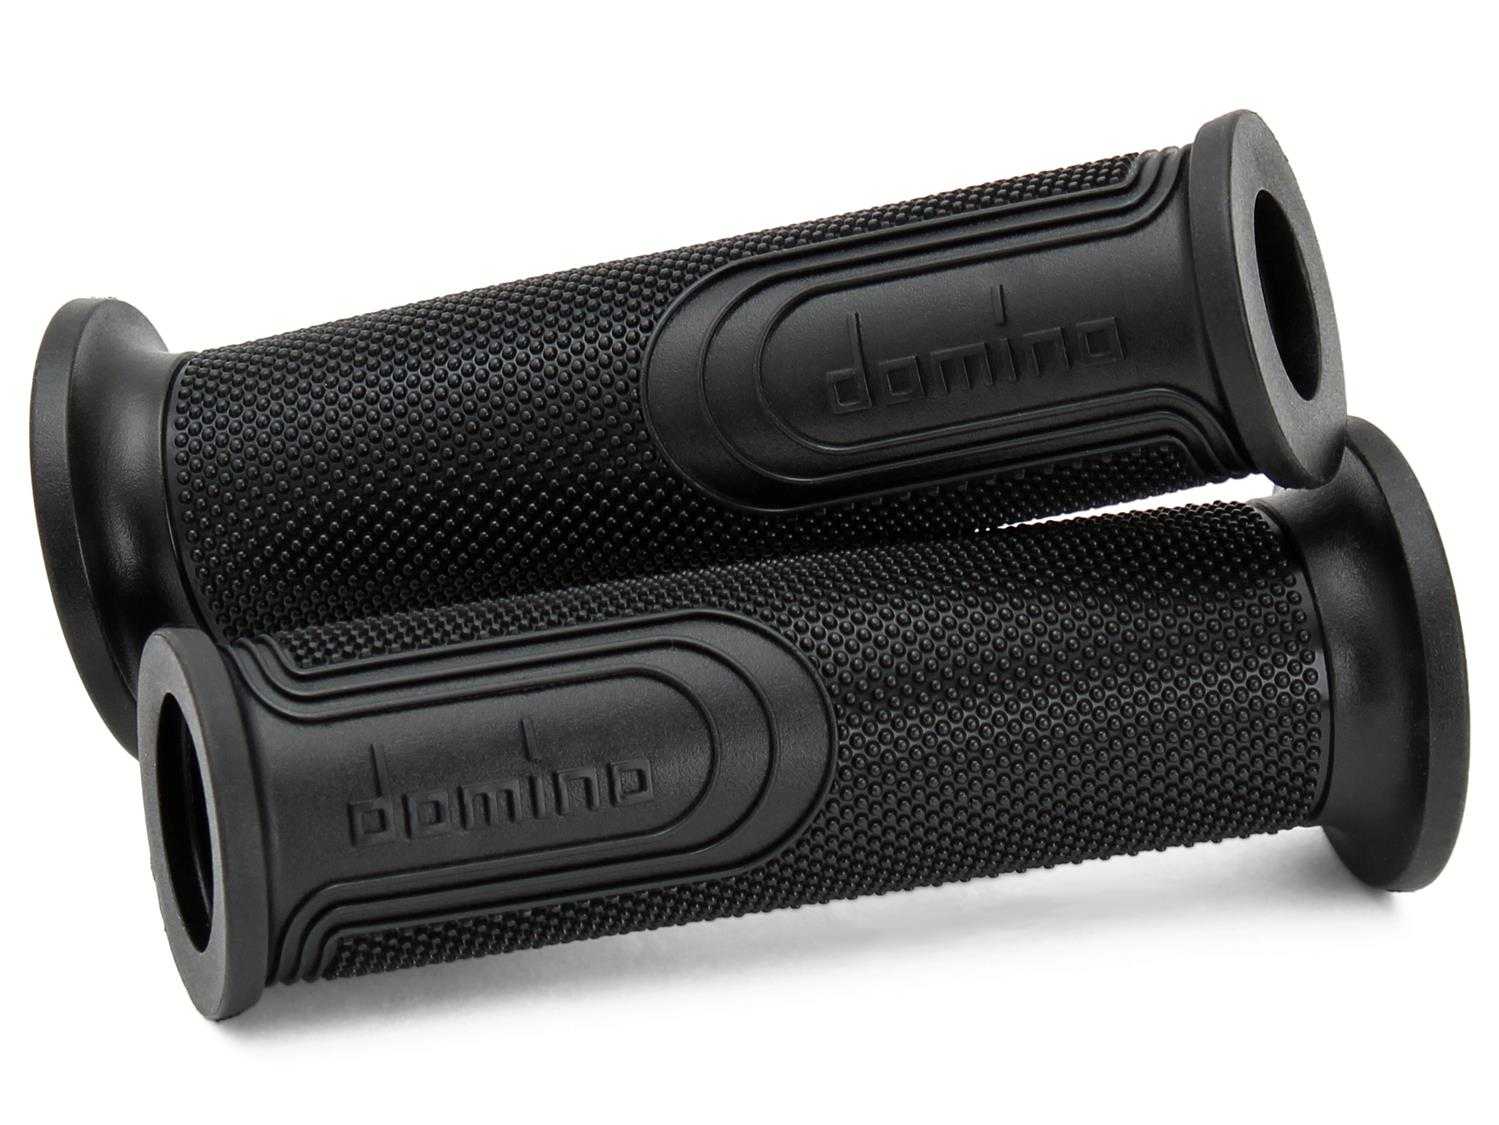 TOMMASELLI, Domino Road Grips - Domino Style Full Knurl